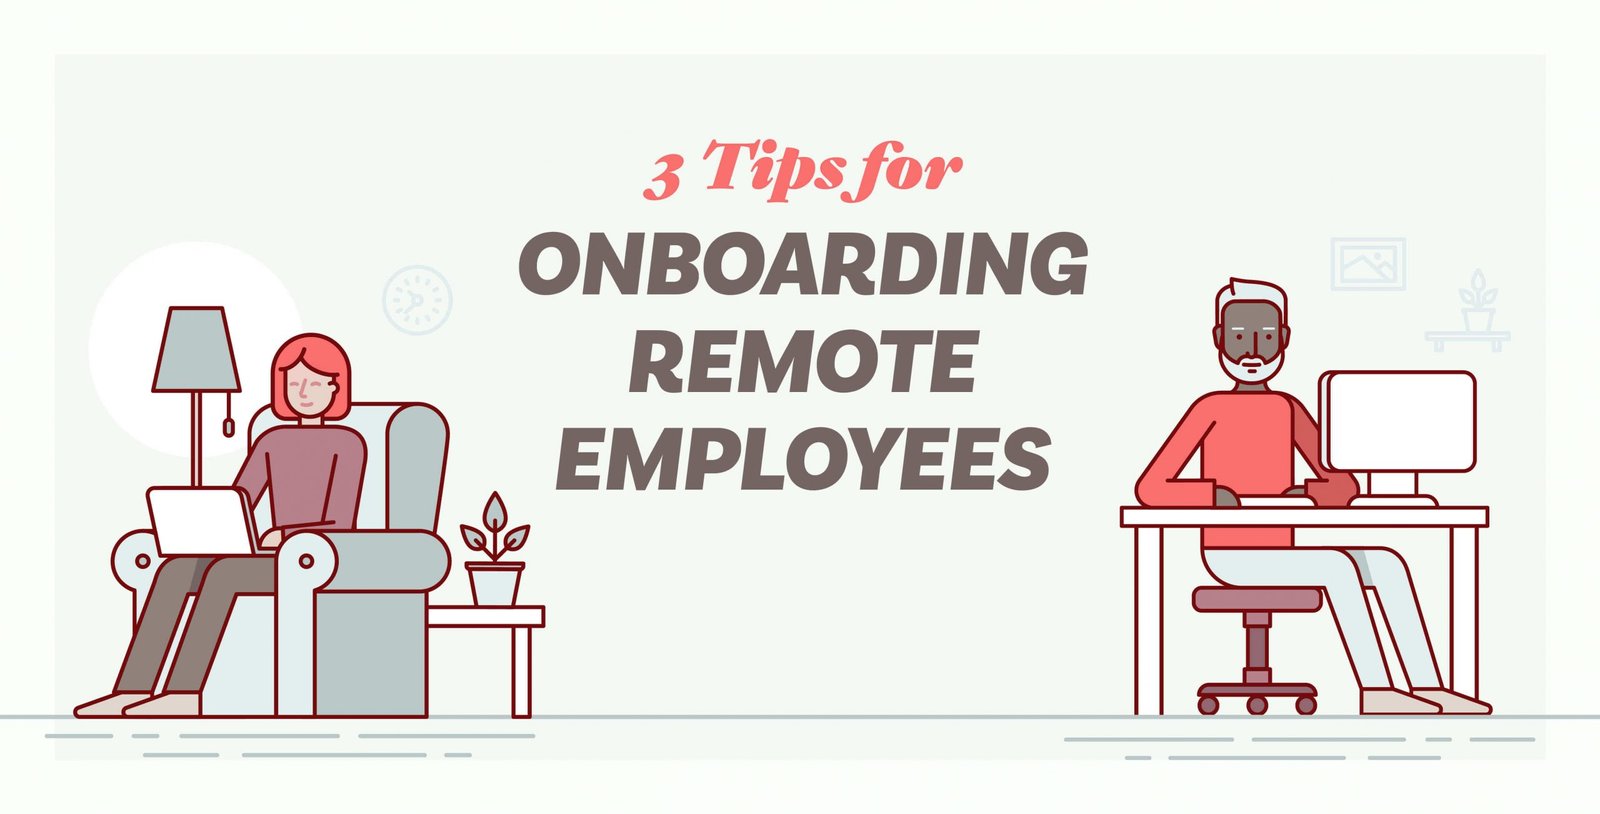 Remote employee onboarding tips from Asana Chief of Staff Anna Binder